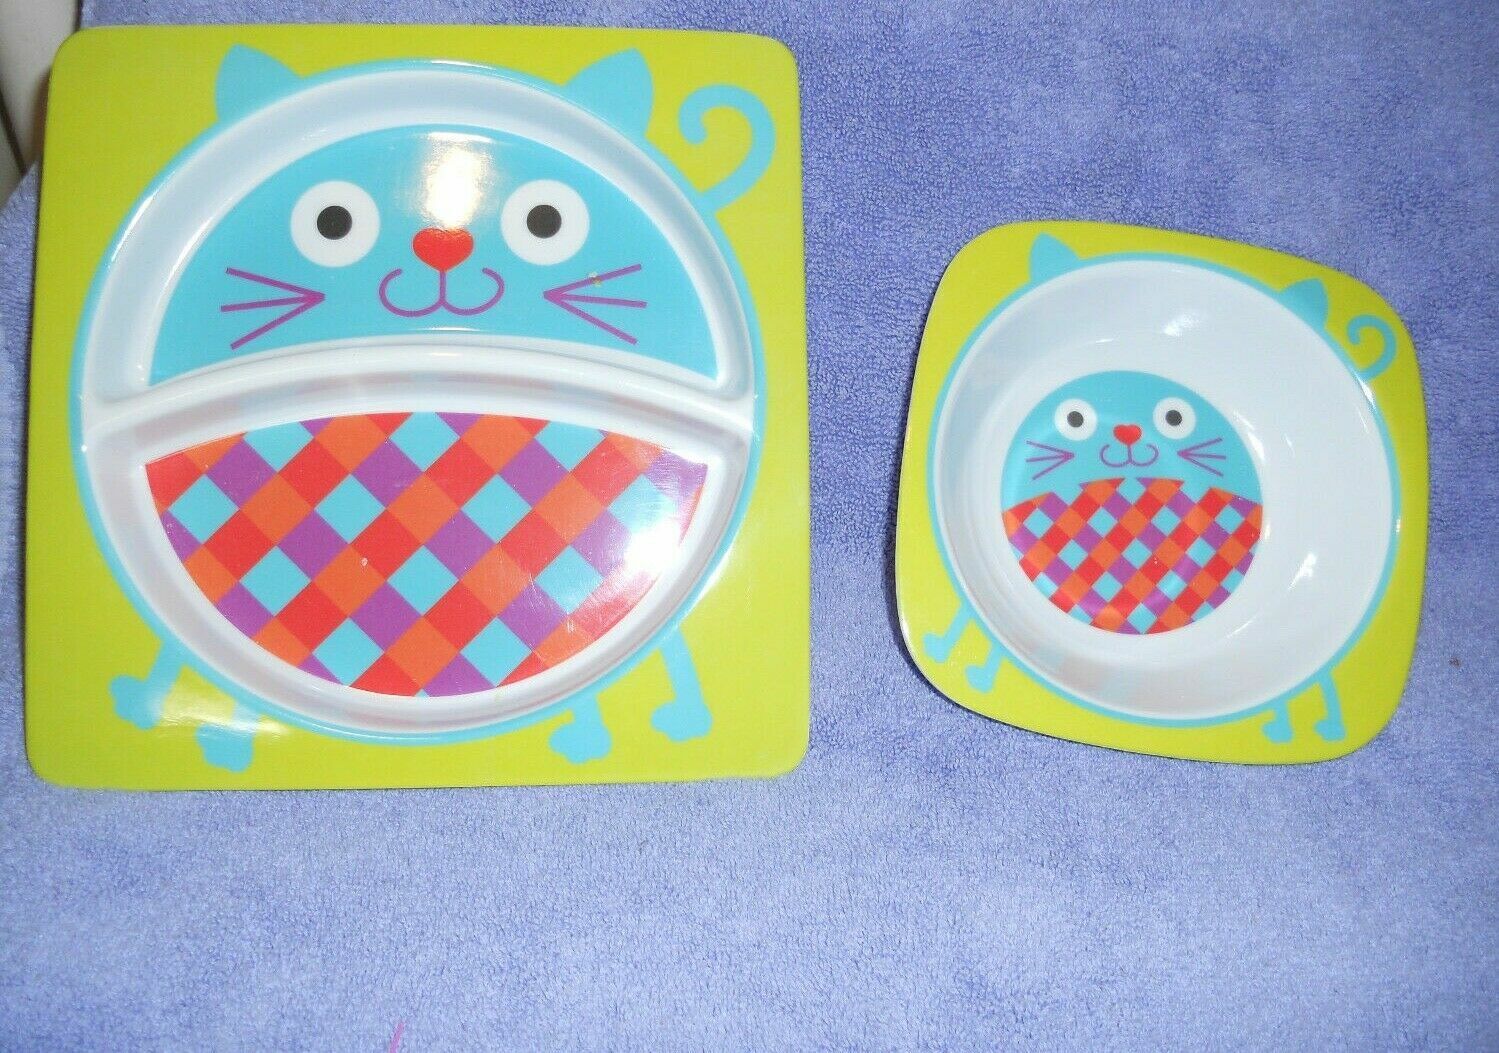 Hard plastic NEW Melamine 2 pc Set Divided plate and bowl Cat